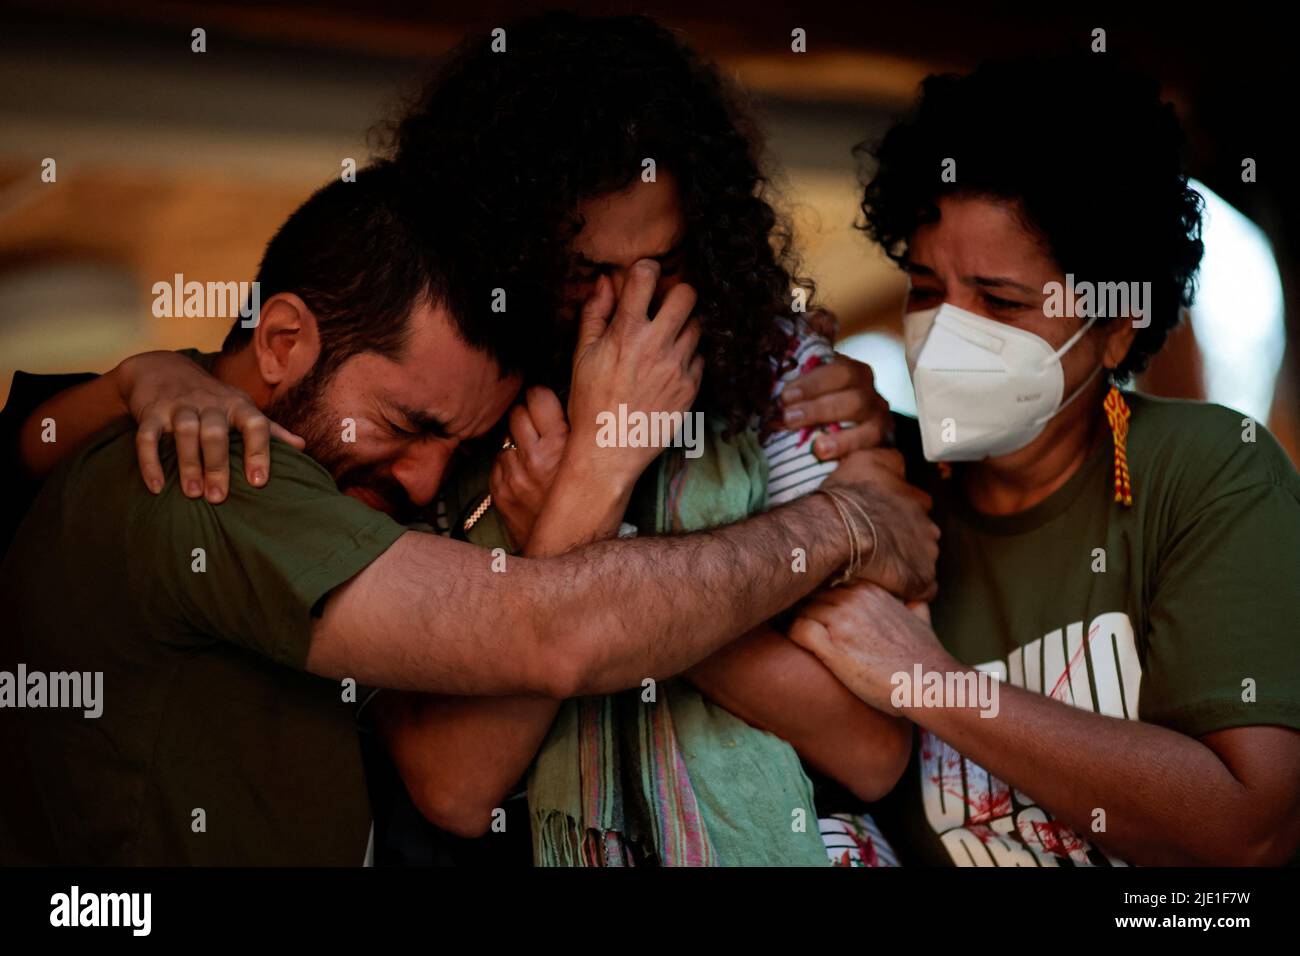 People are seen crying during an ecumenical act organized by indigenists and friends, in honor of the indigenous expert Bruno Pereira and journalist Dom Phillips, who were murdered in the Amazon, in Brasilia, Brazil June 24, 2022. REUTERS/Ueslei Marcelino Stock Photo